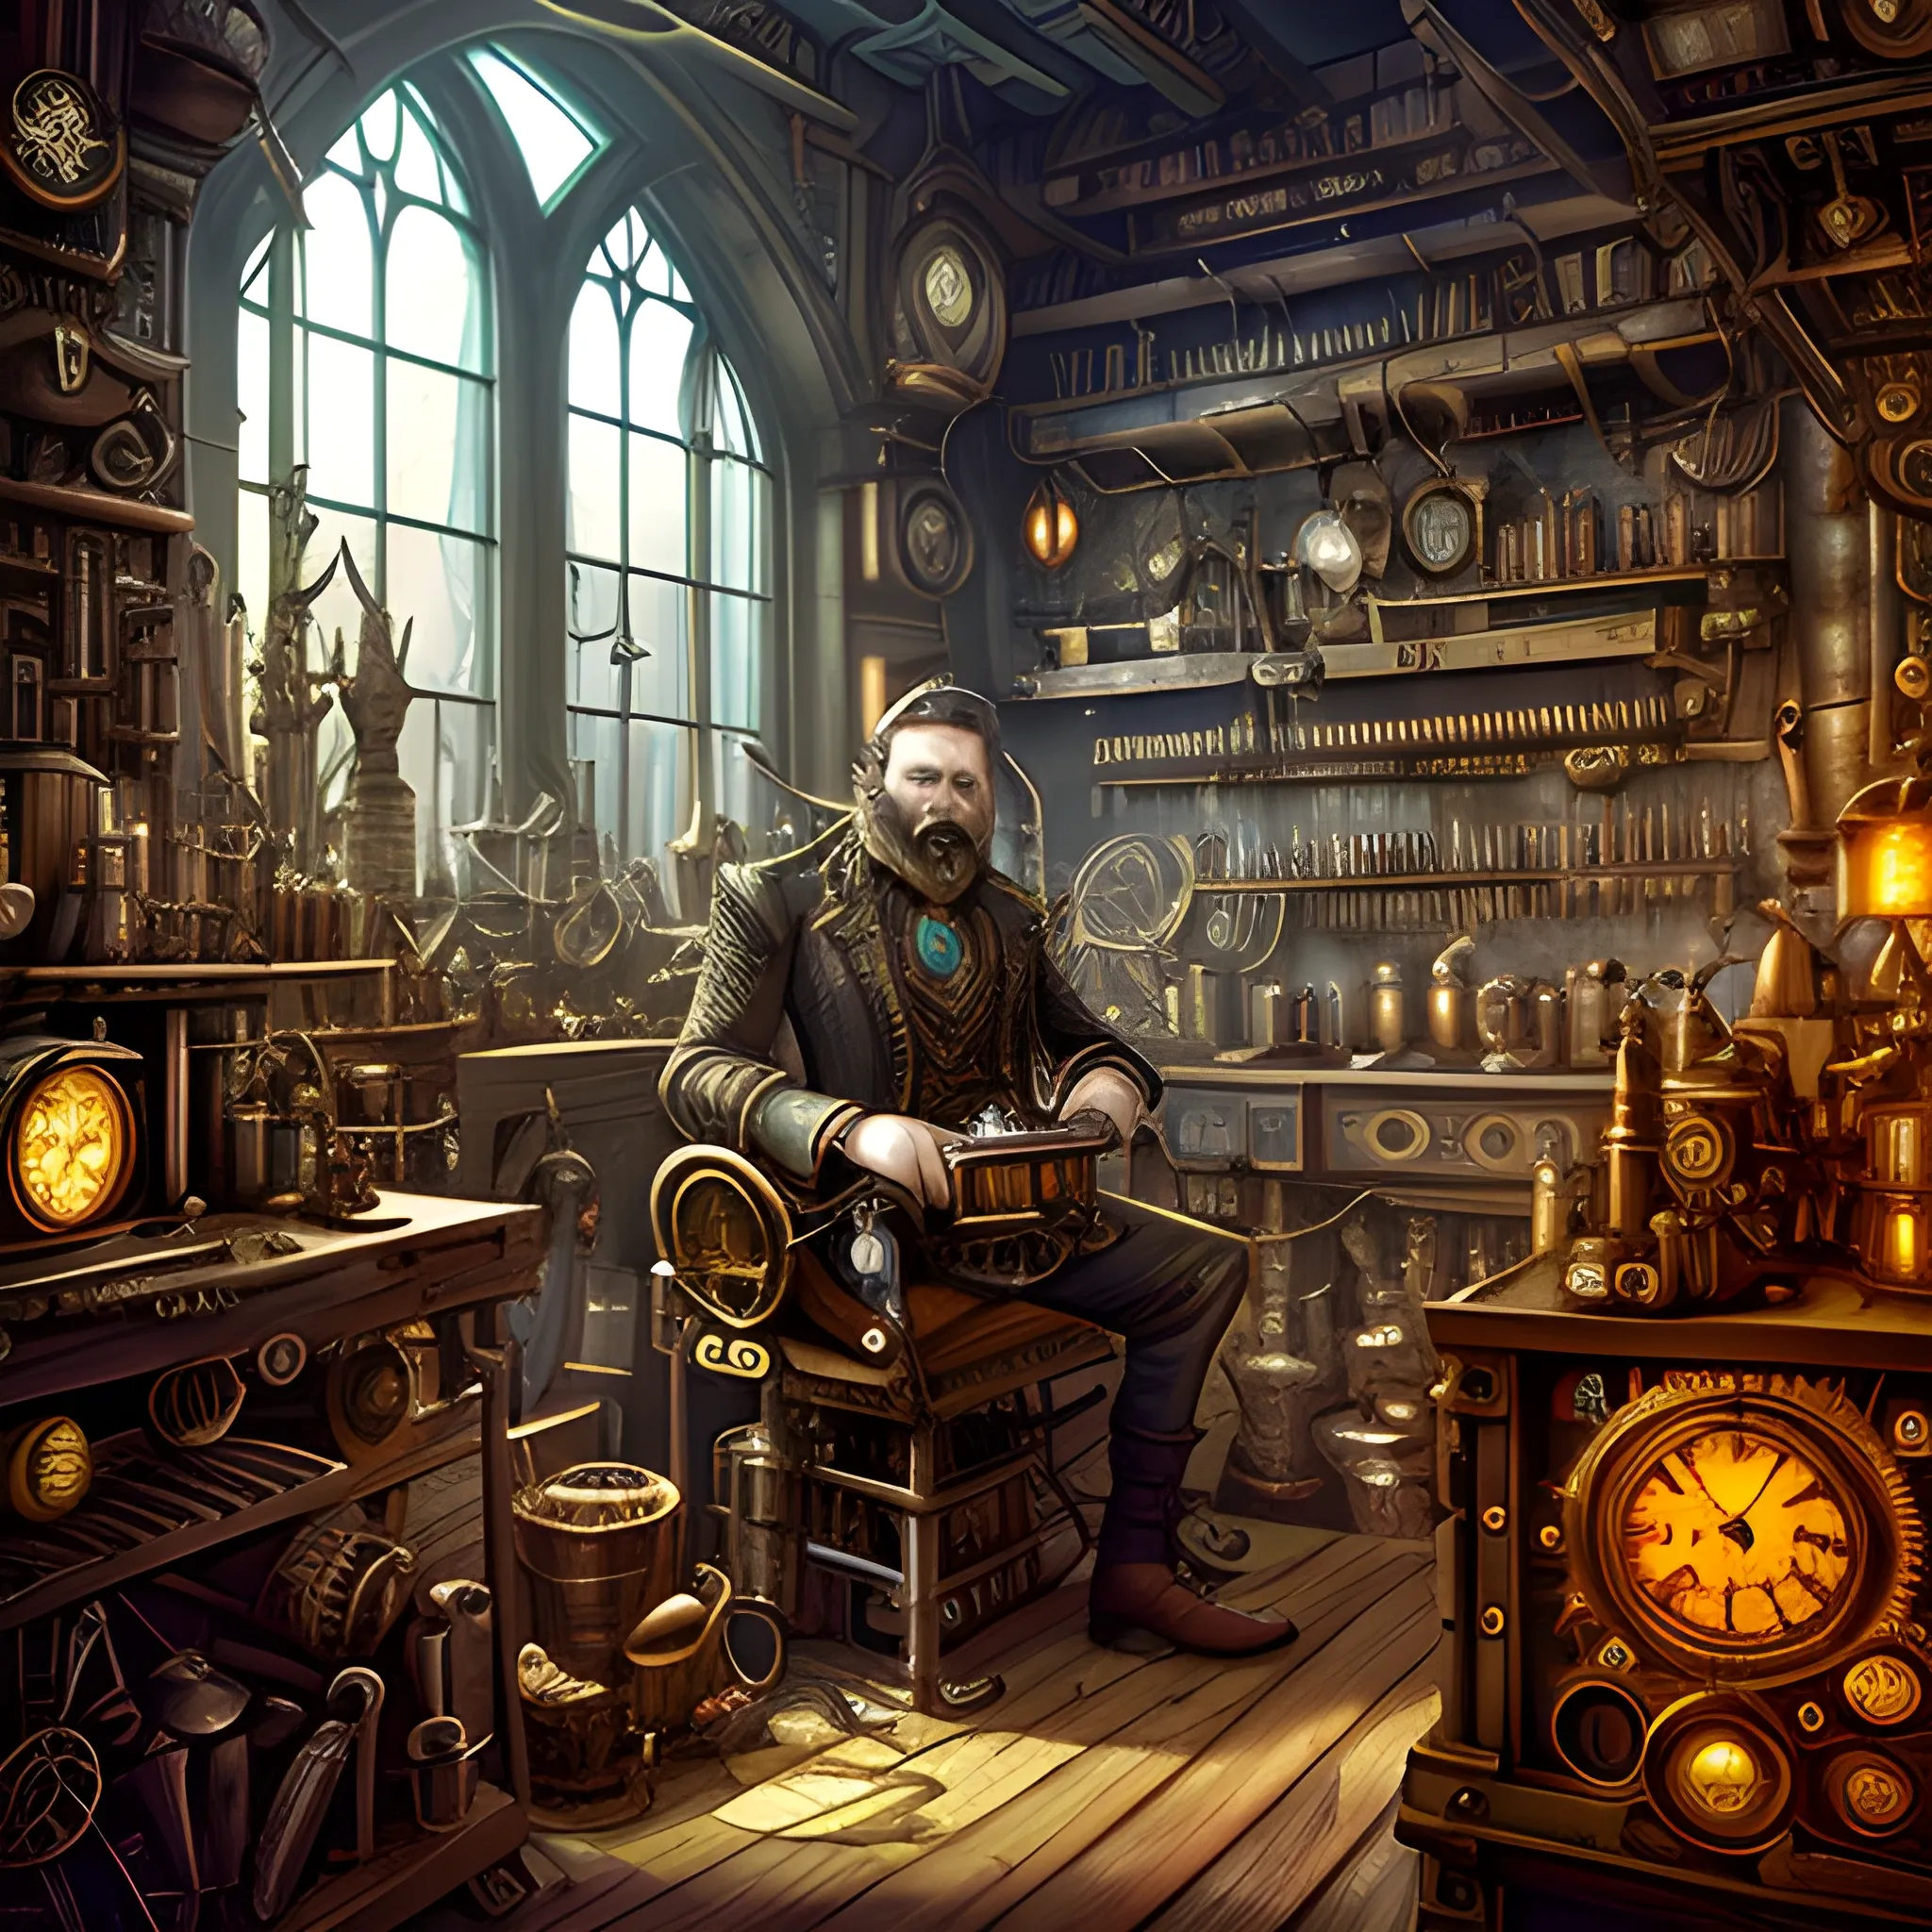  A steampunk-inspired digital illustration of a  elfo inventor in a cluttered workshop, surrounded by intricate machinery and gears. The camera angle is a medium shot, capturing the elfo's enthusiastic expression as he tinkers with a fantastical contraption. The lighting is cold and atmospheric, with rays of sunlight streaming through stained glass windows, casting vibrant colors and ((shadows)) across the room. The style combines elements of steampunk and clock-punk,and machines tecnologycalsresembling the works of Jules Verne and H.R. Giger. The image is detailed and intricate, showcasing the gnome's ingenious inventions and the mesmerizing complexity of the steampunk world.
